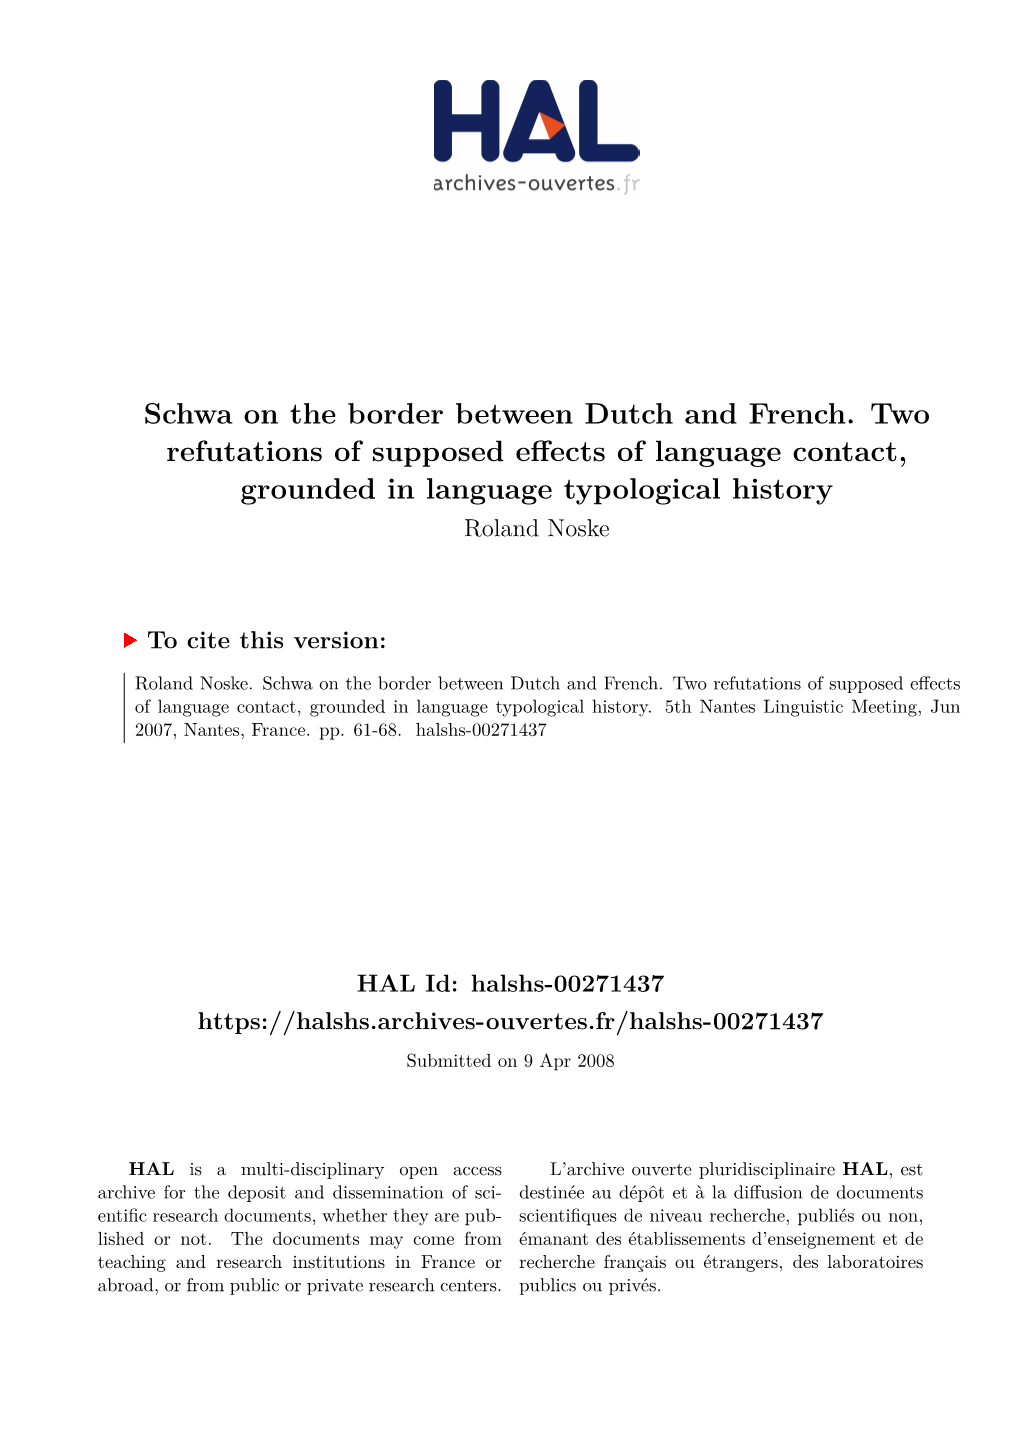 Schwa on the Border Between Dutch and French. Two Refutations of Supposed Effects of Language Contact, Grounded in Language Typological History Roland Noske